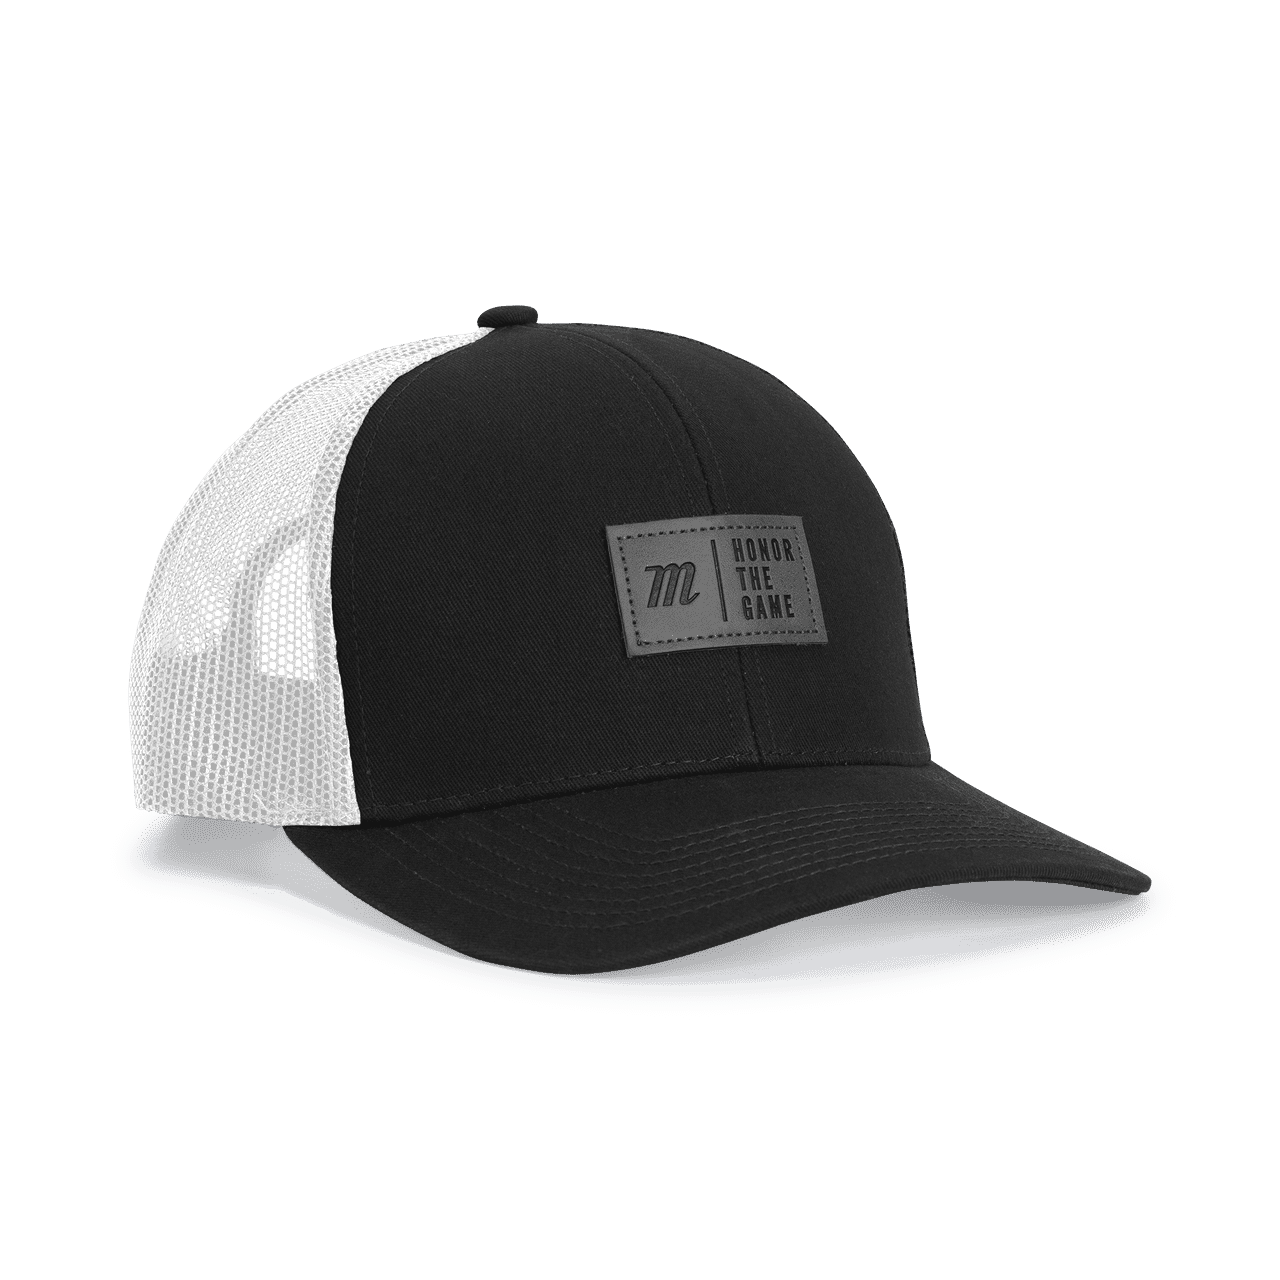 Marucci 'Honor The Game' Trucker Snapback Hat - Black White - HIT a Double - 1